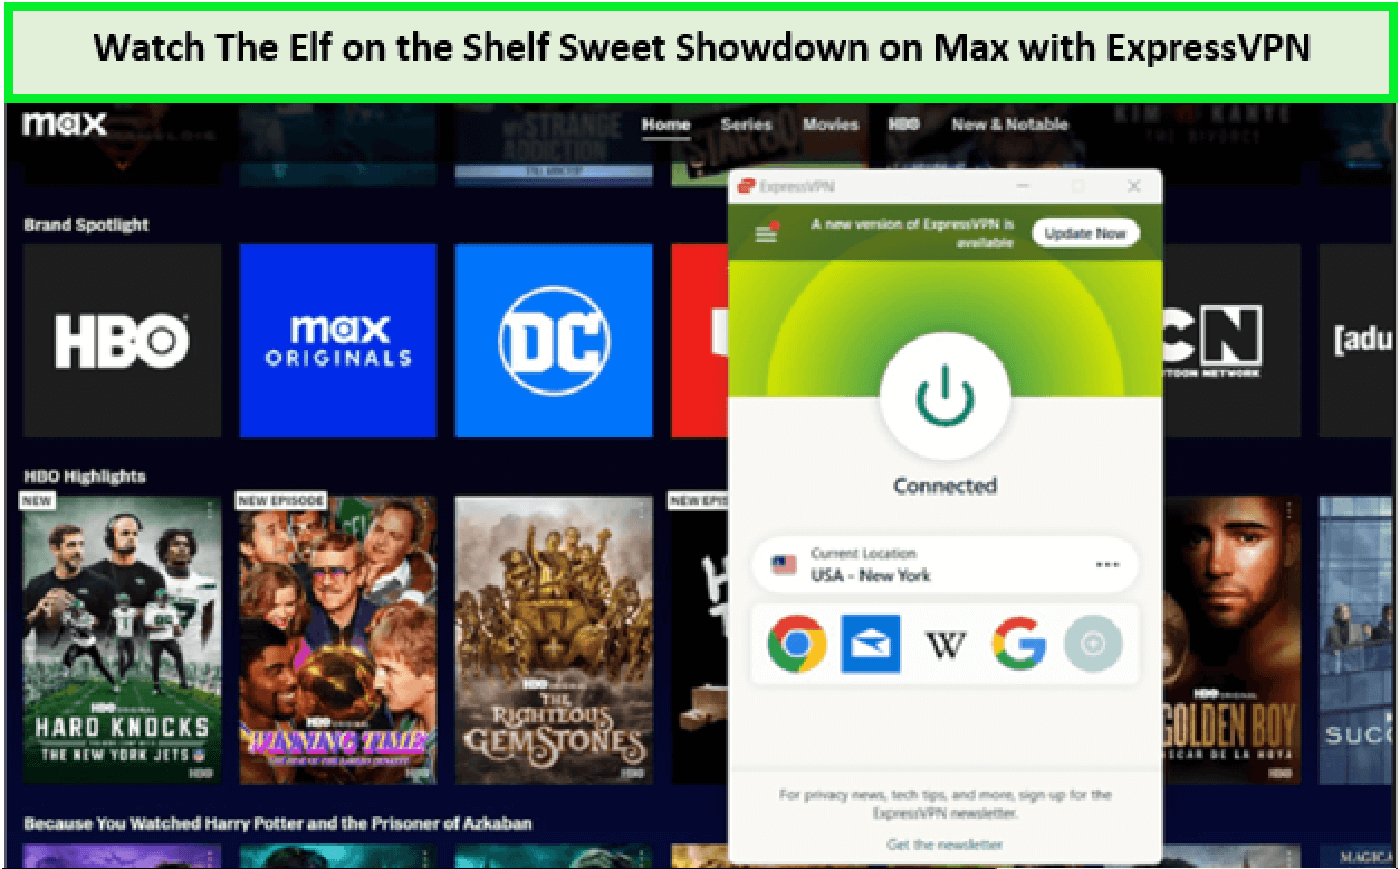 Watch-The-Elf-on-the-Shelf-Sweet-Showdown-in-UK-on-Max-with-ExpressVPN